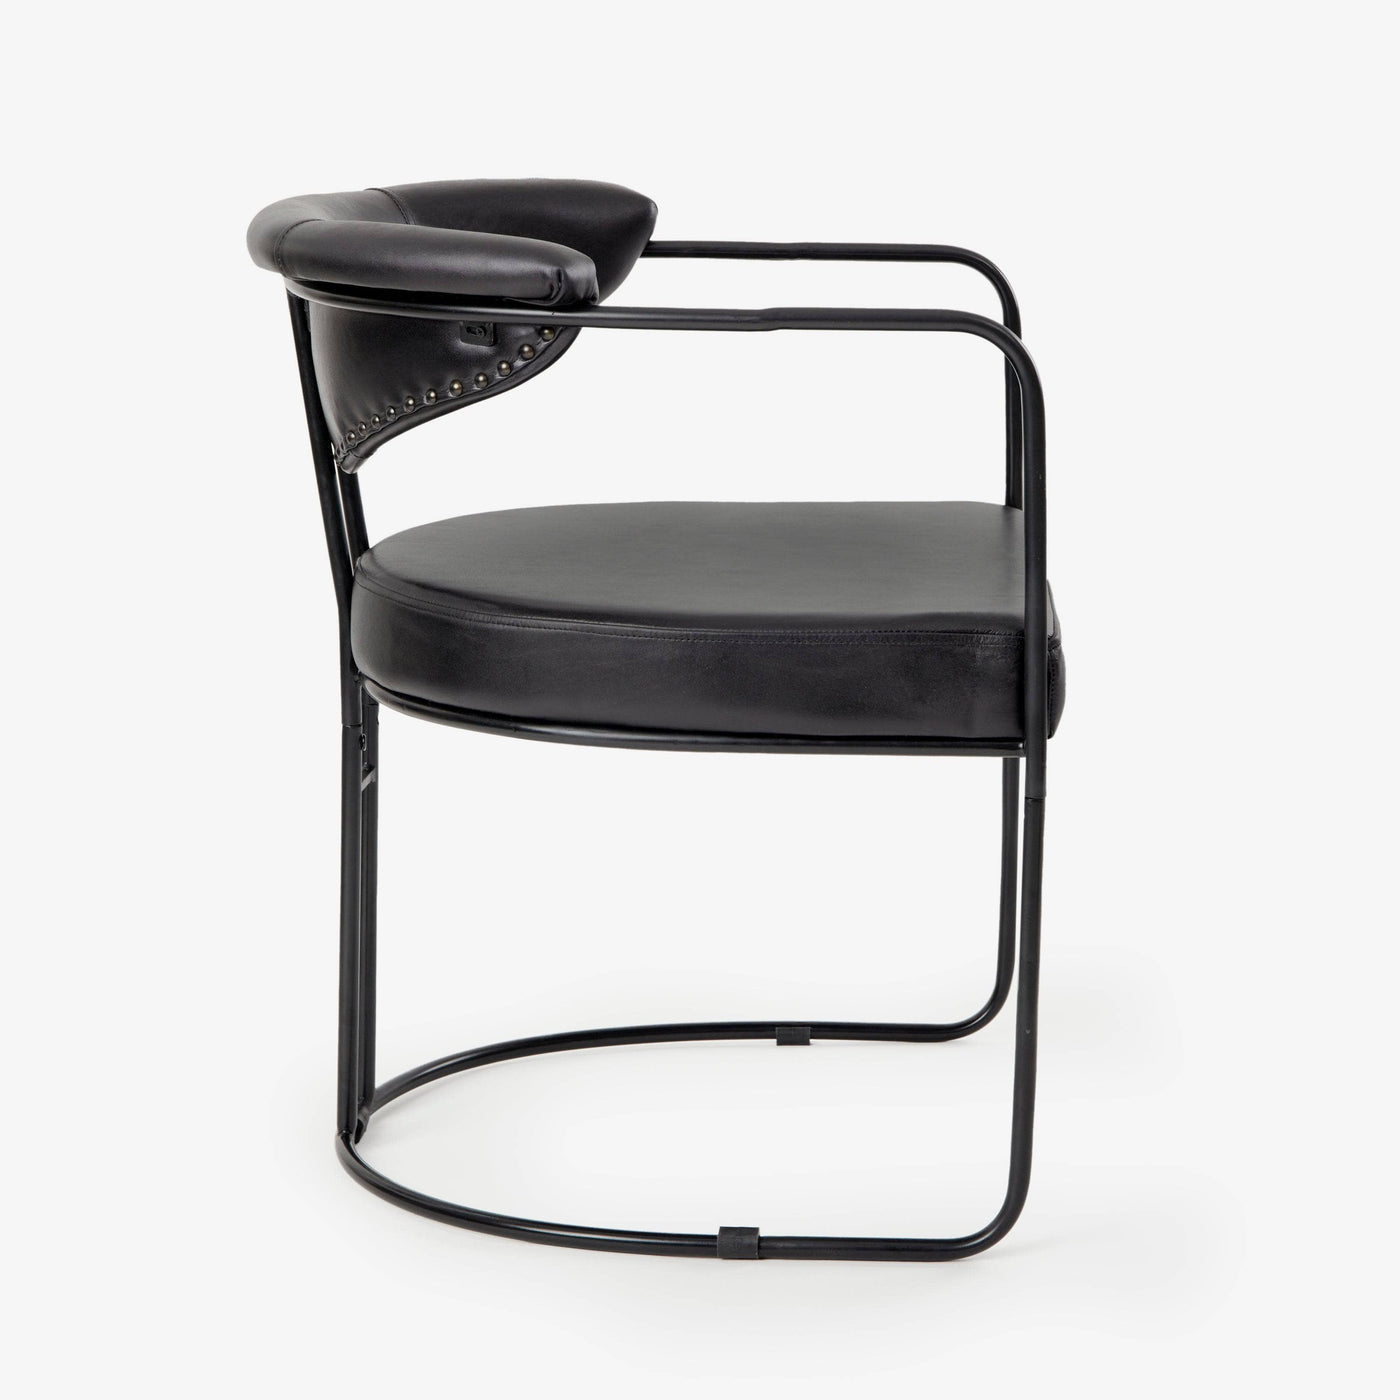 Itari Leather Armchair, Black Dining Chairs & Benches sazy.com